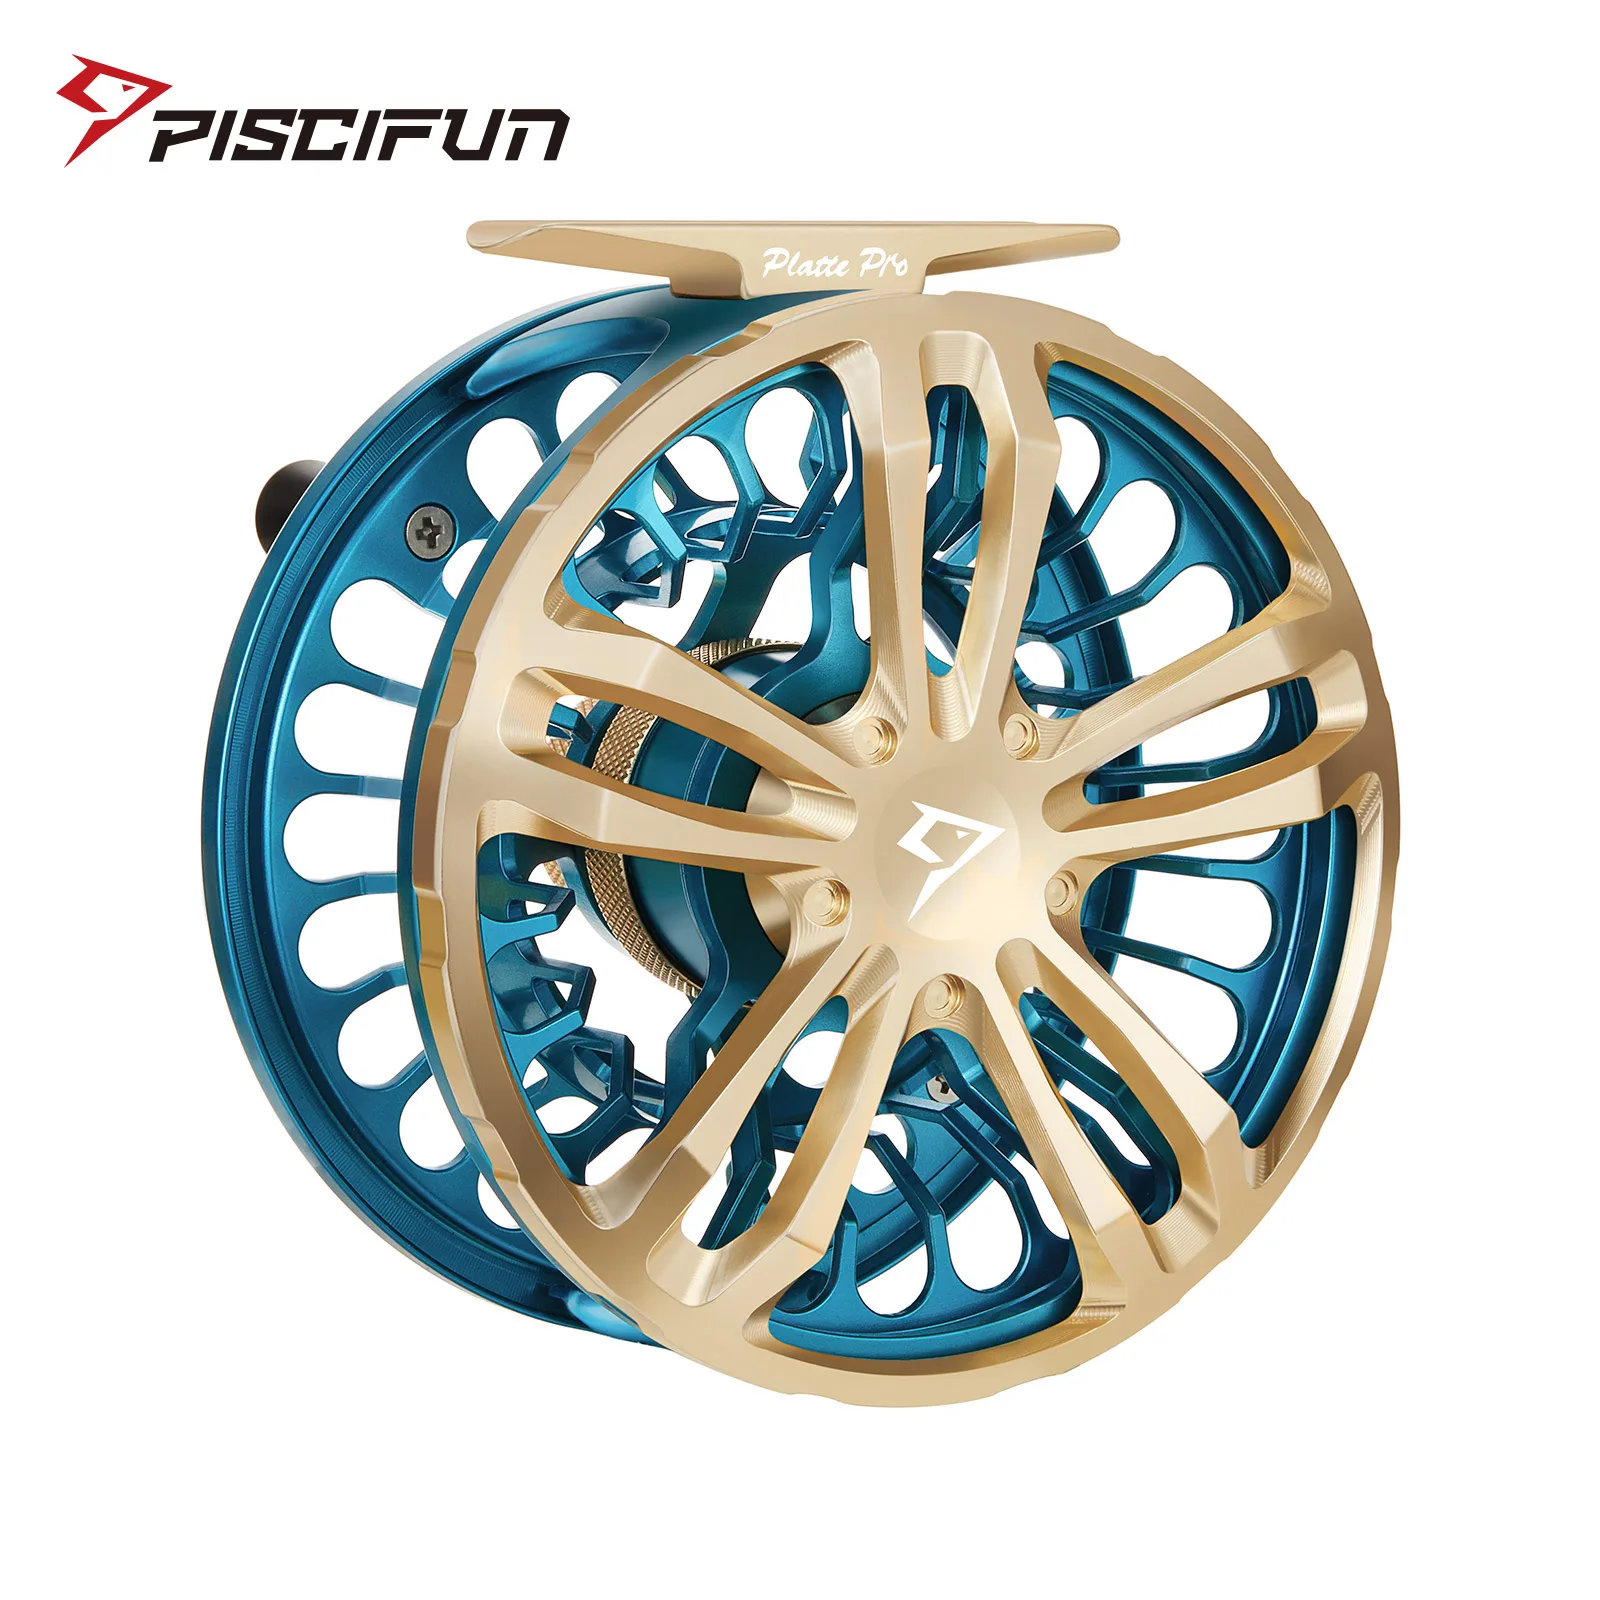 

Piscifun Platte Pro Fly Reel Full Size Sealed Drag CNC Machined Strong Large Arbor Double Click Drag Retrieve Fly Fishing Reel